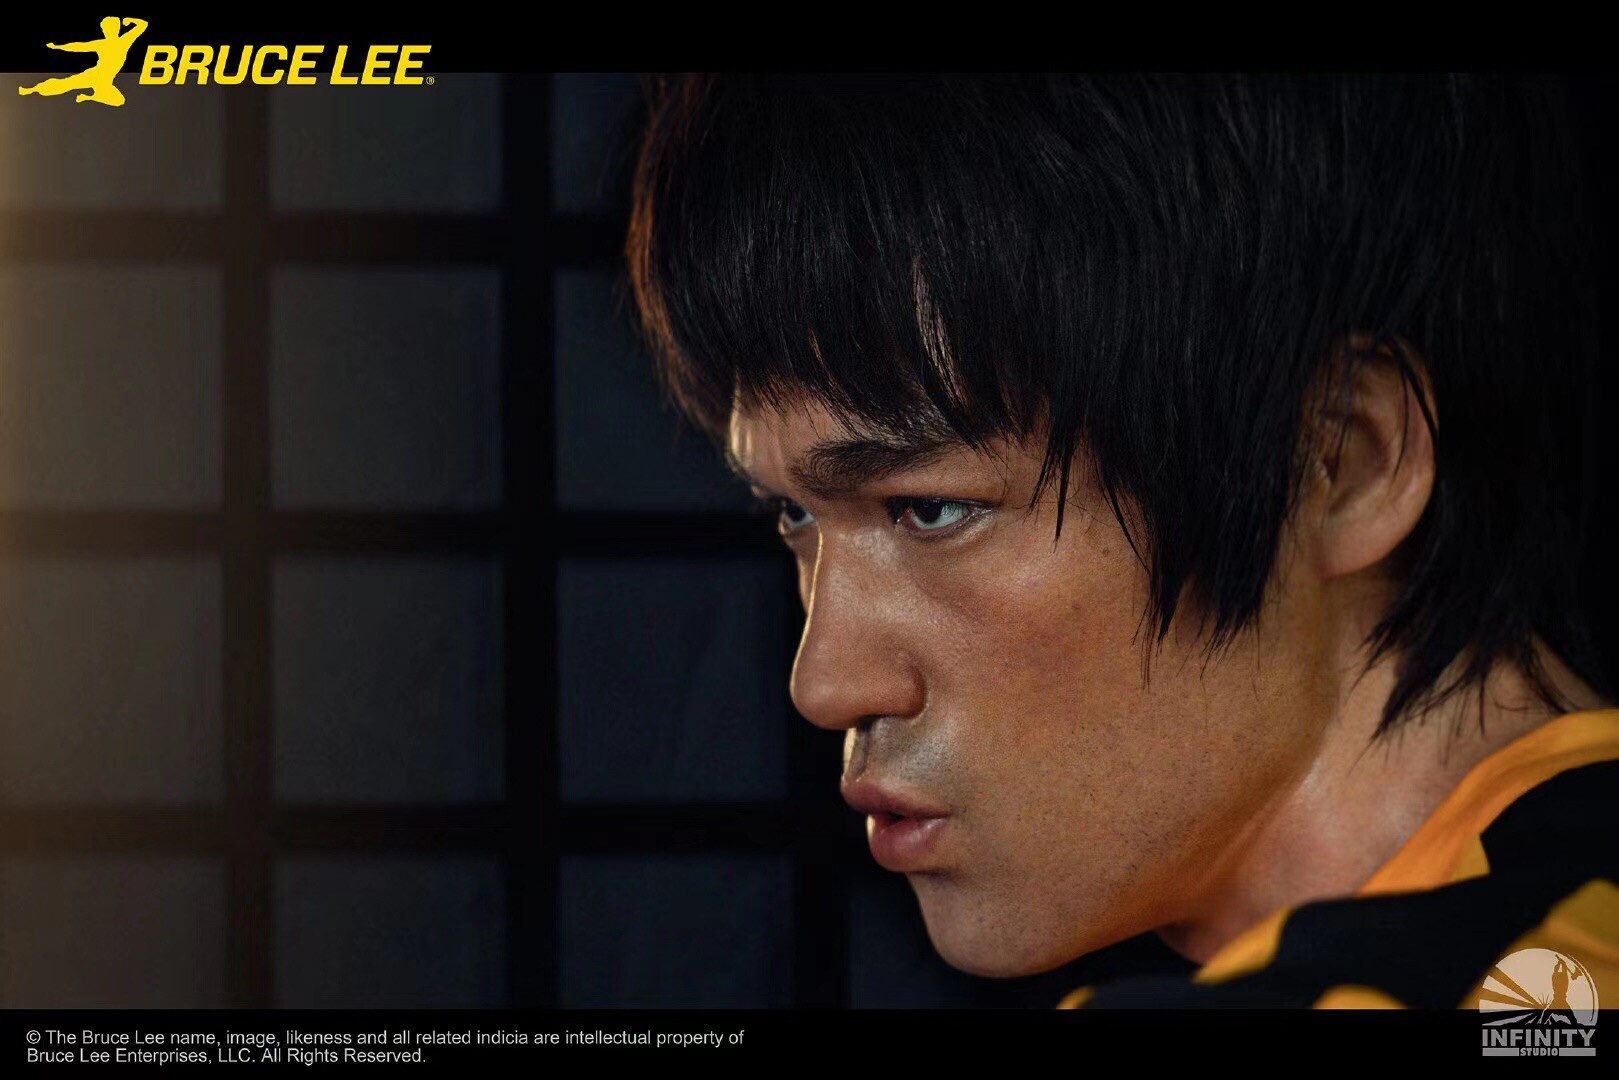 Michael Mao💦 - Bruce Lee 1/1 Life Size Bust